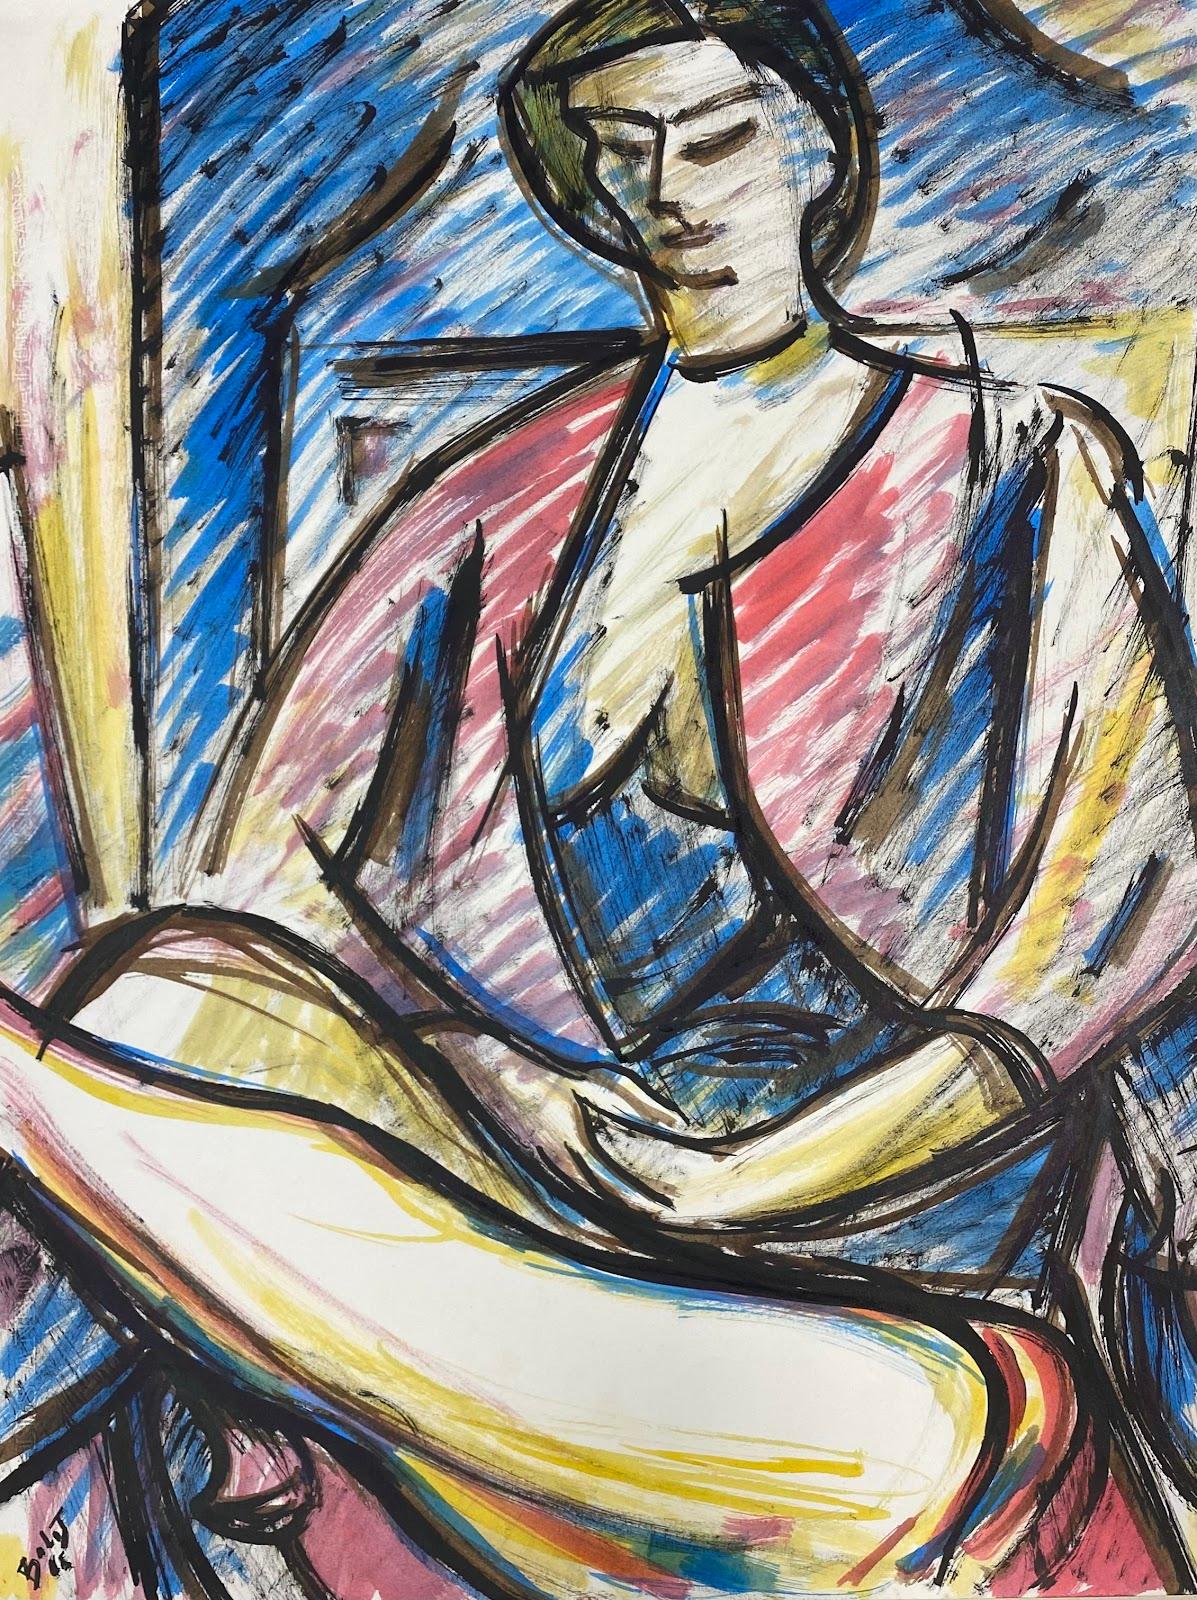 20th Century French Modernist Painting Blue & Red Posed Figure Seated